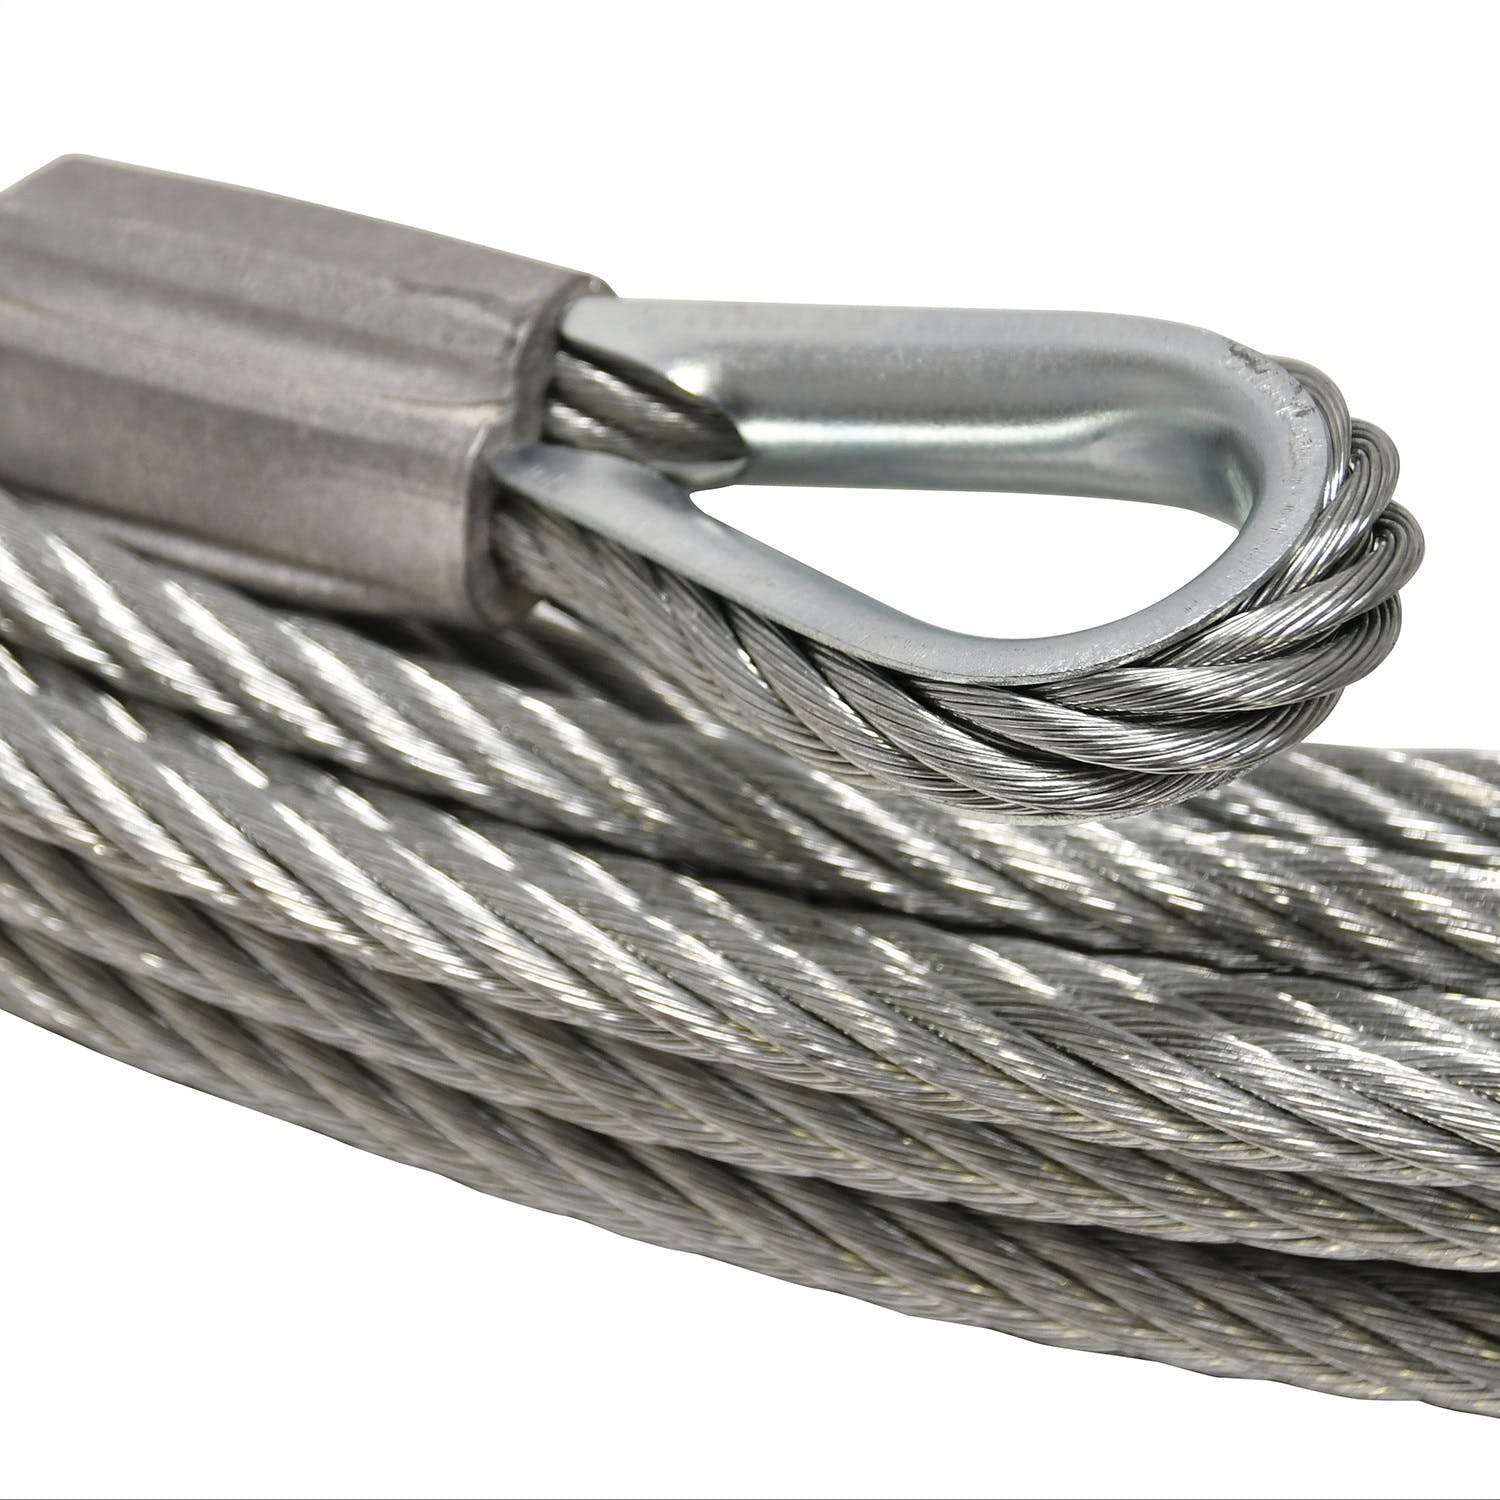 Superwinch 90-24575 Replacement Wire Rope 5/16 diameter x 95 length